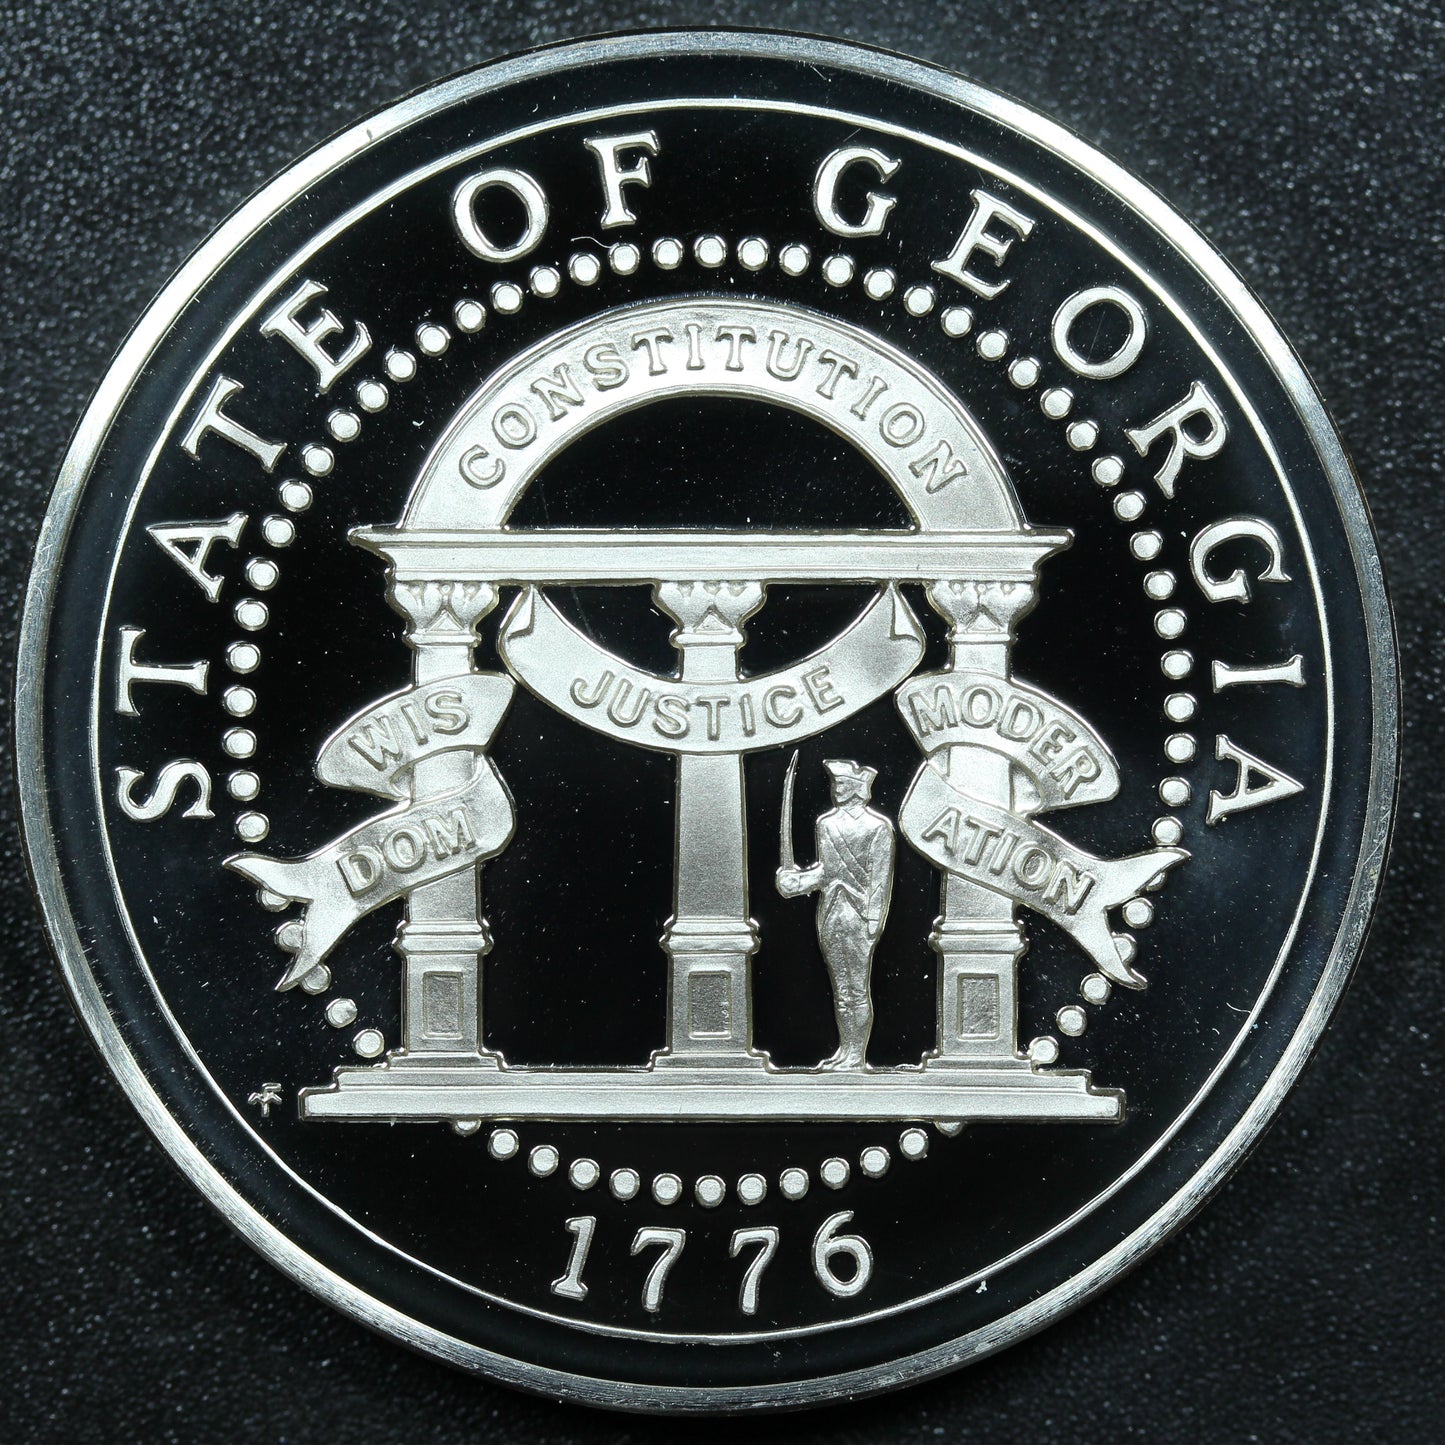 Franklin Mint 50 State Bicentennial Medal - GEORGIA Sterling Silver Proof w/ Capsule